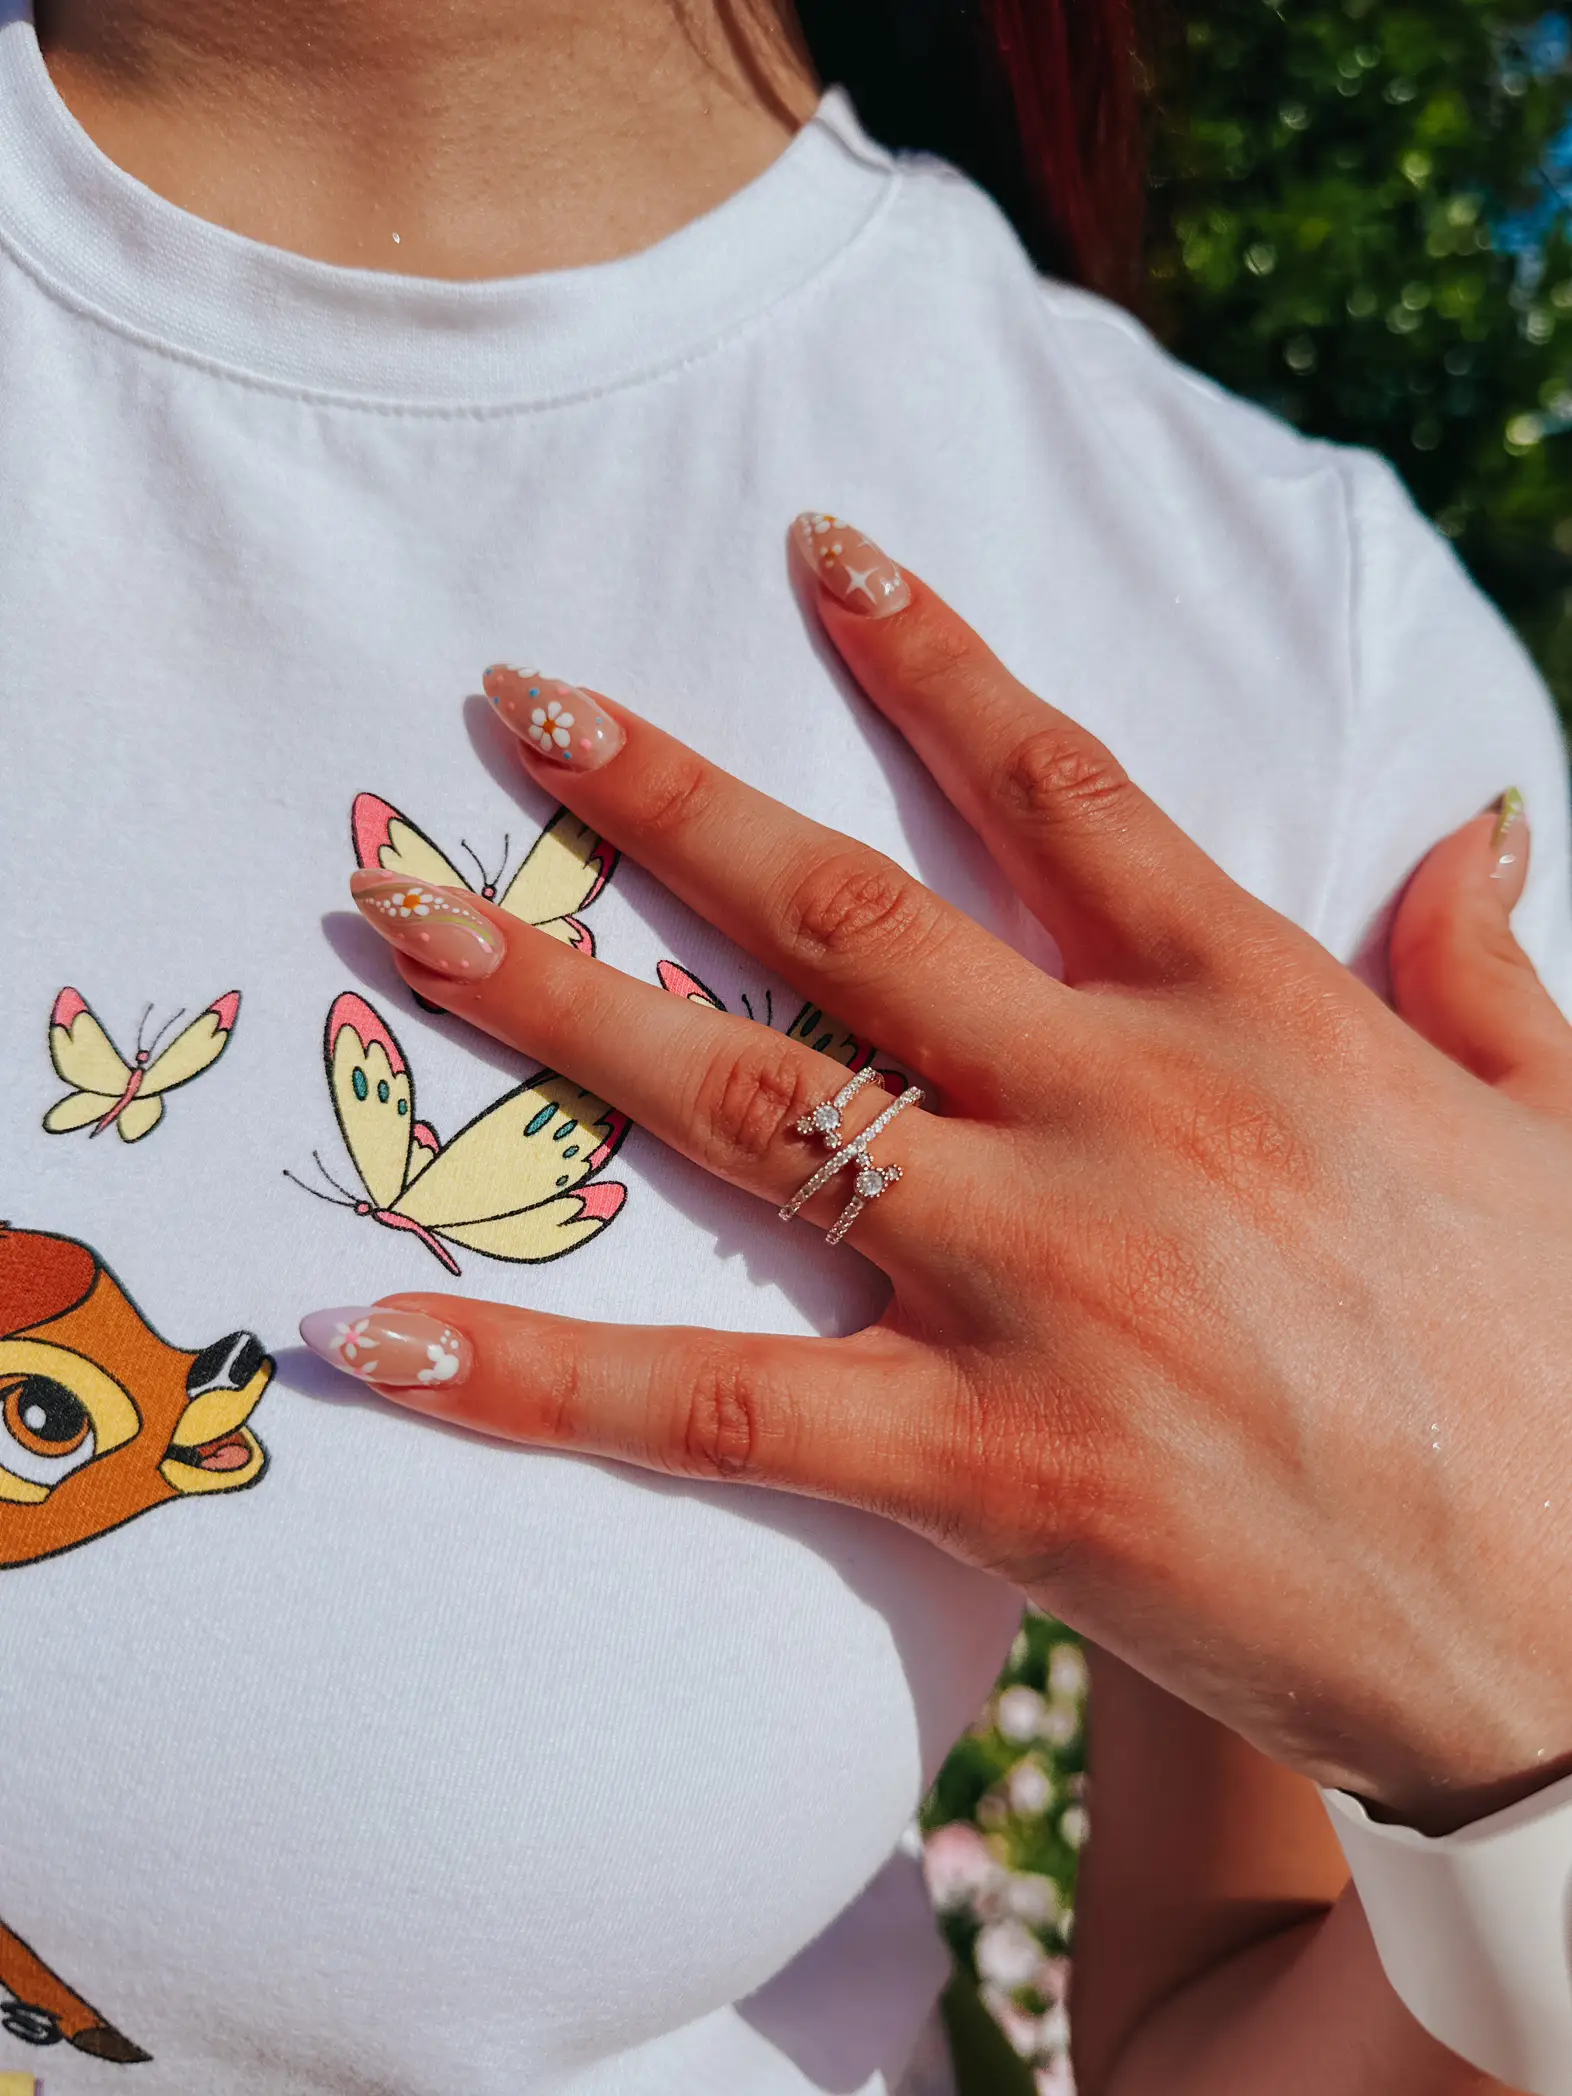 The perfect spooky disney nails!🎃👻🍁, Gallery posted by Aleeah Noelle